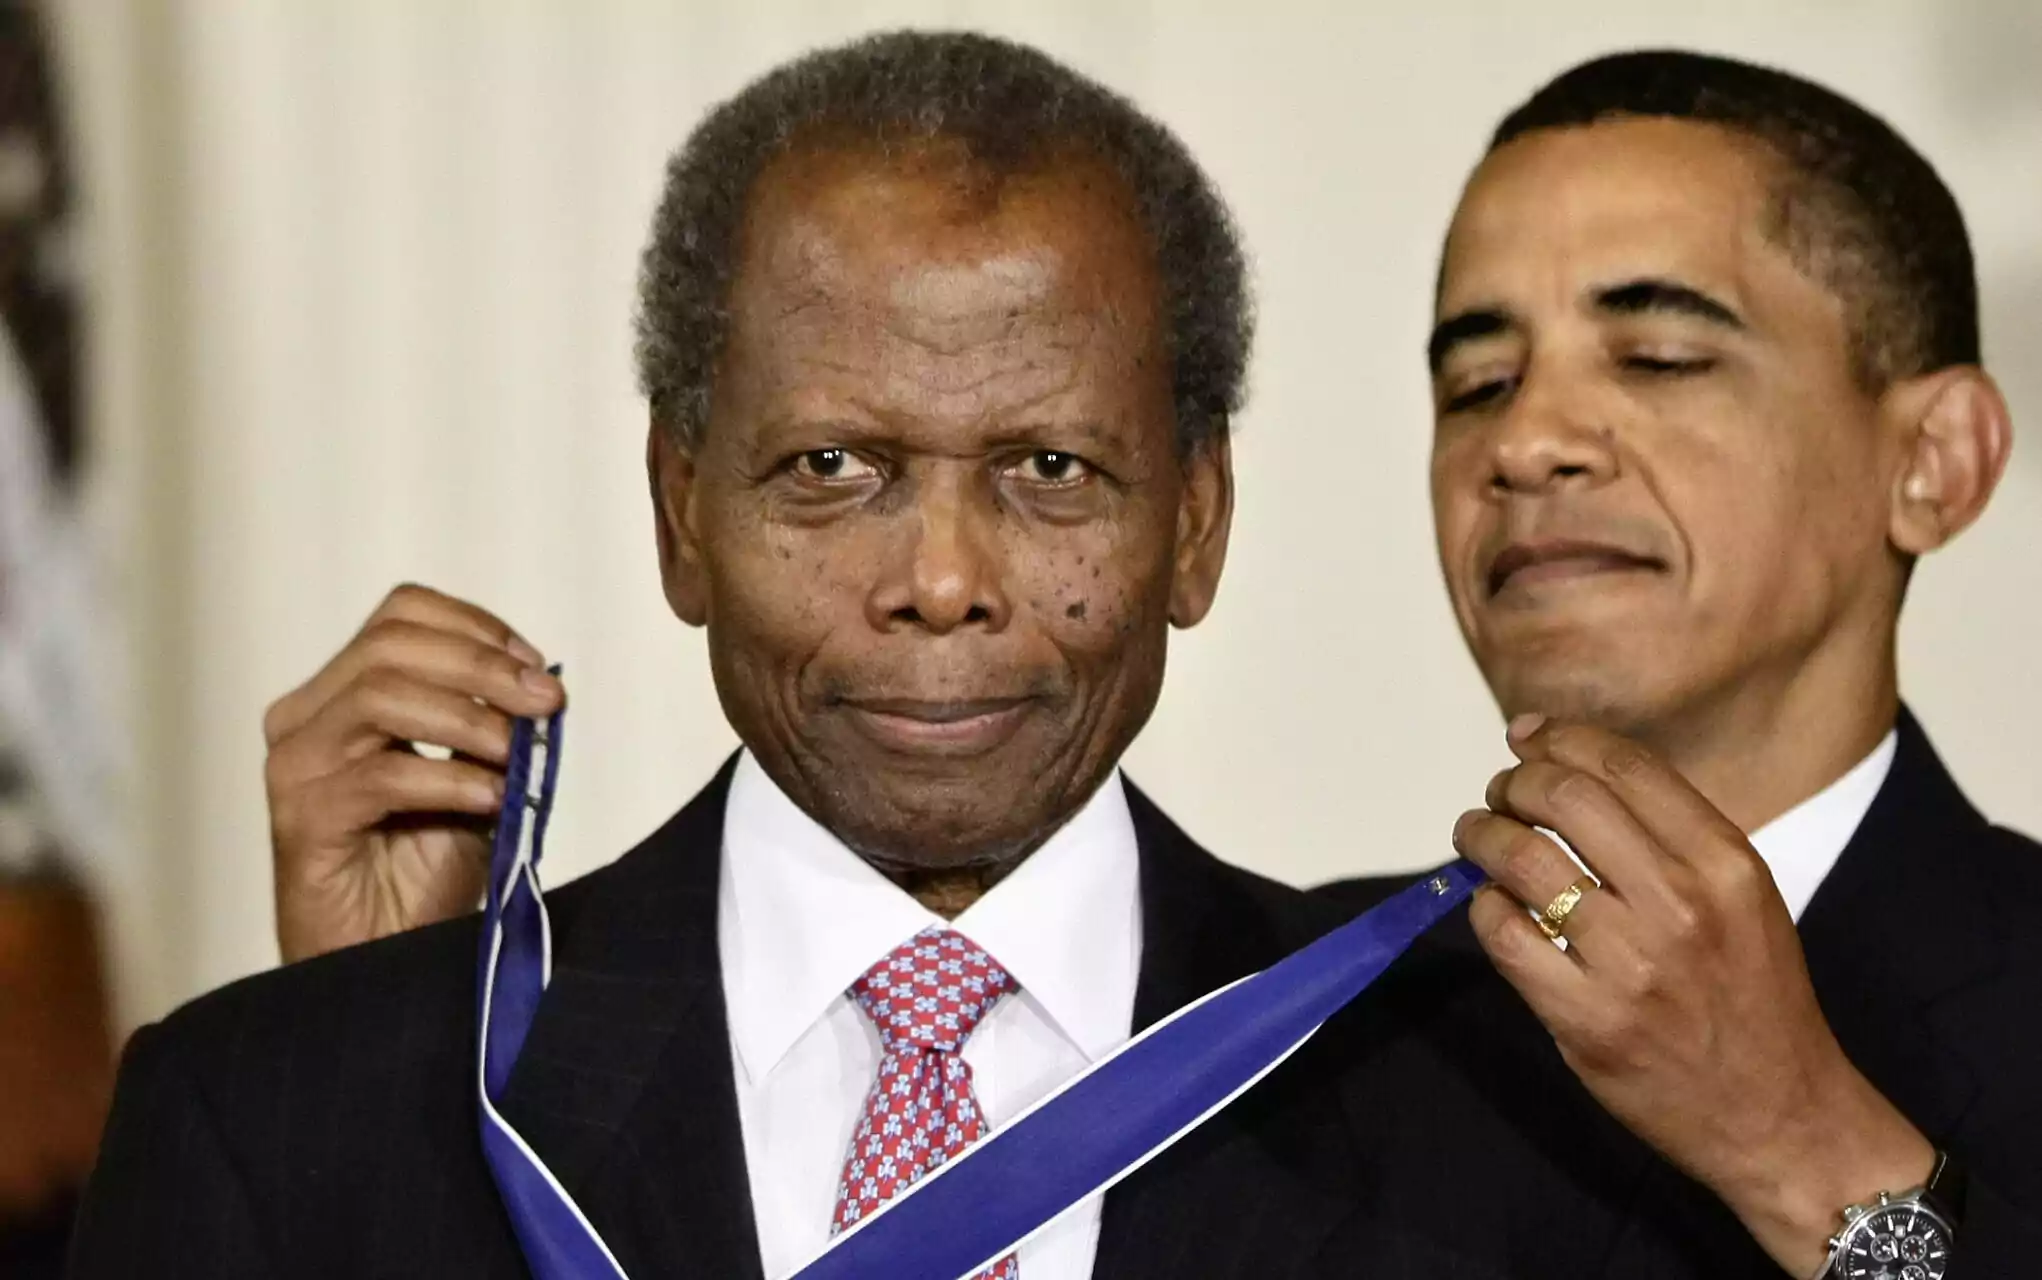 Sidney Poitier, The First Black Man To Receive An Academy Award For Best Actor, Dies At The Age Of 94.